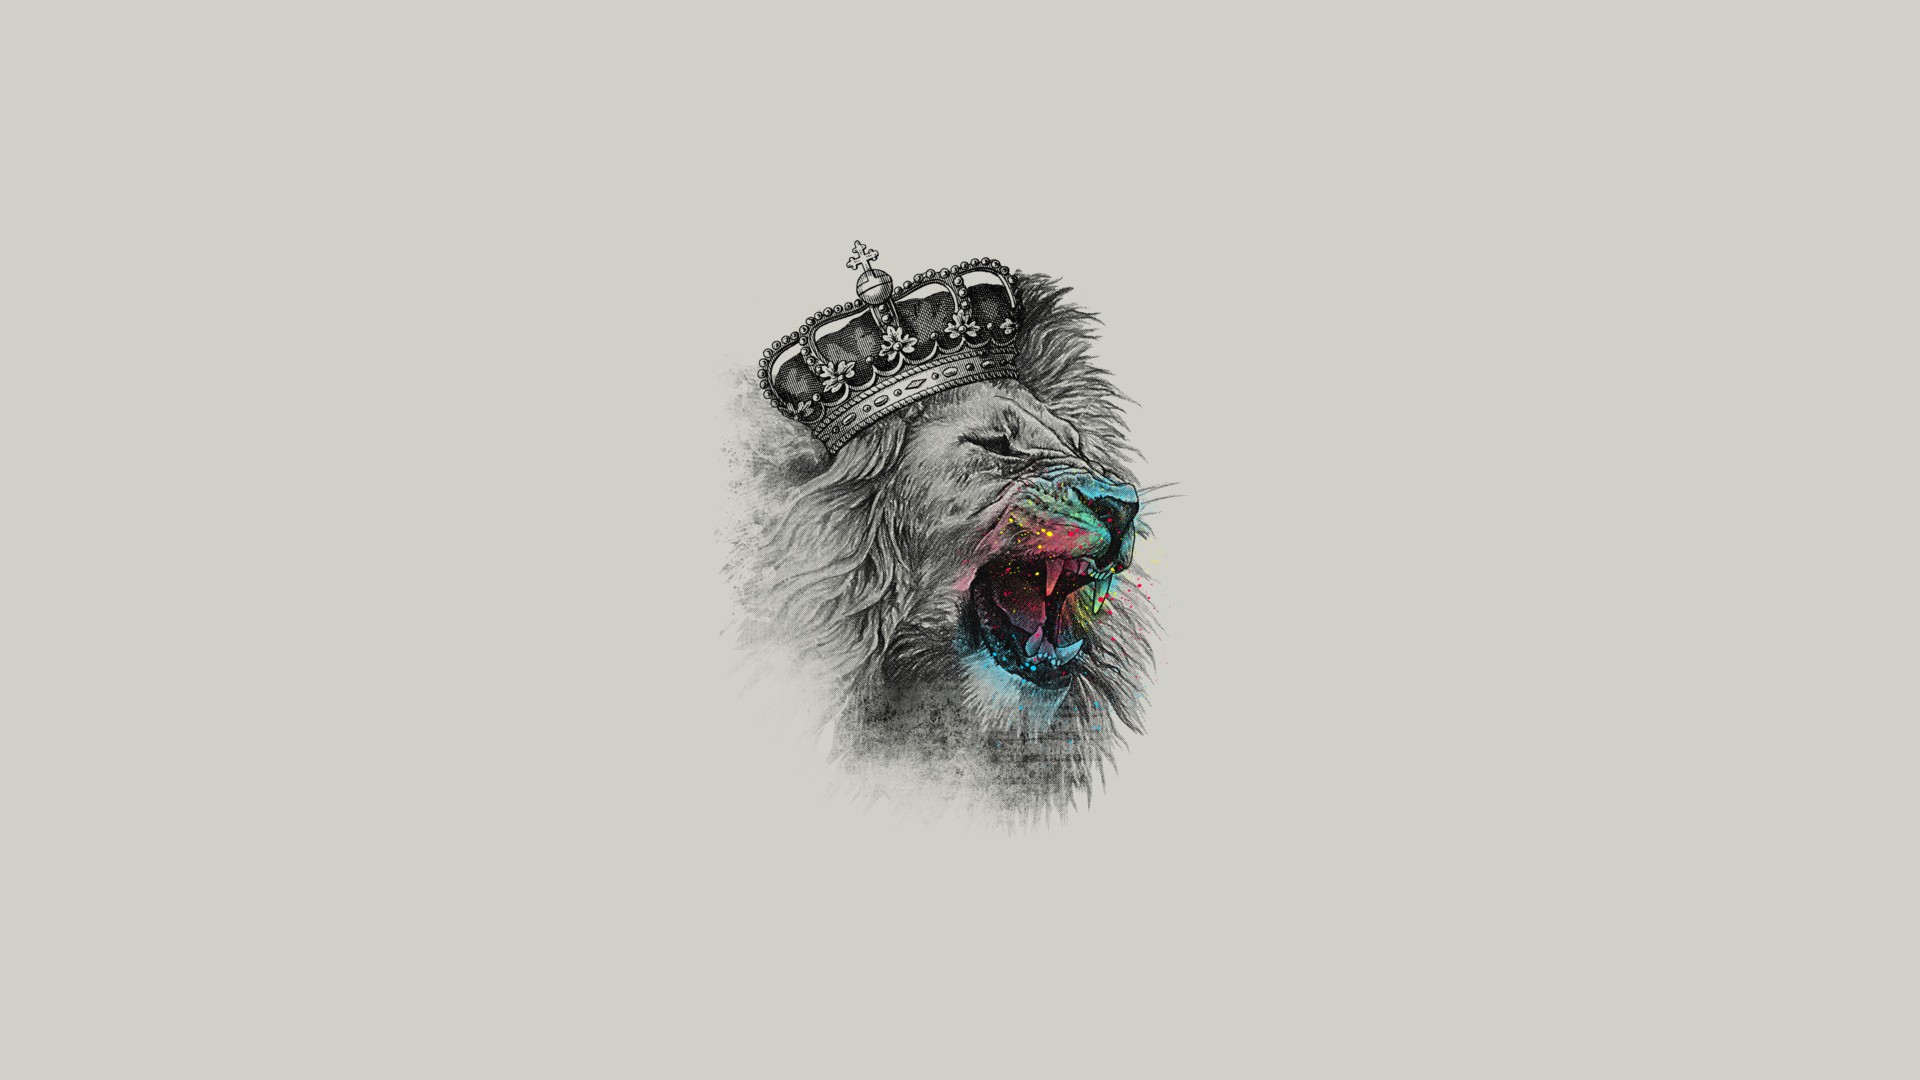 General 1920x1080 fantasy art king lion crown selective coloring simple background animals mammals minimalism gray background